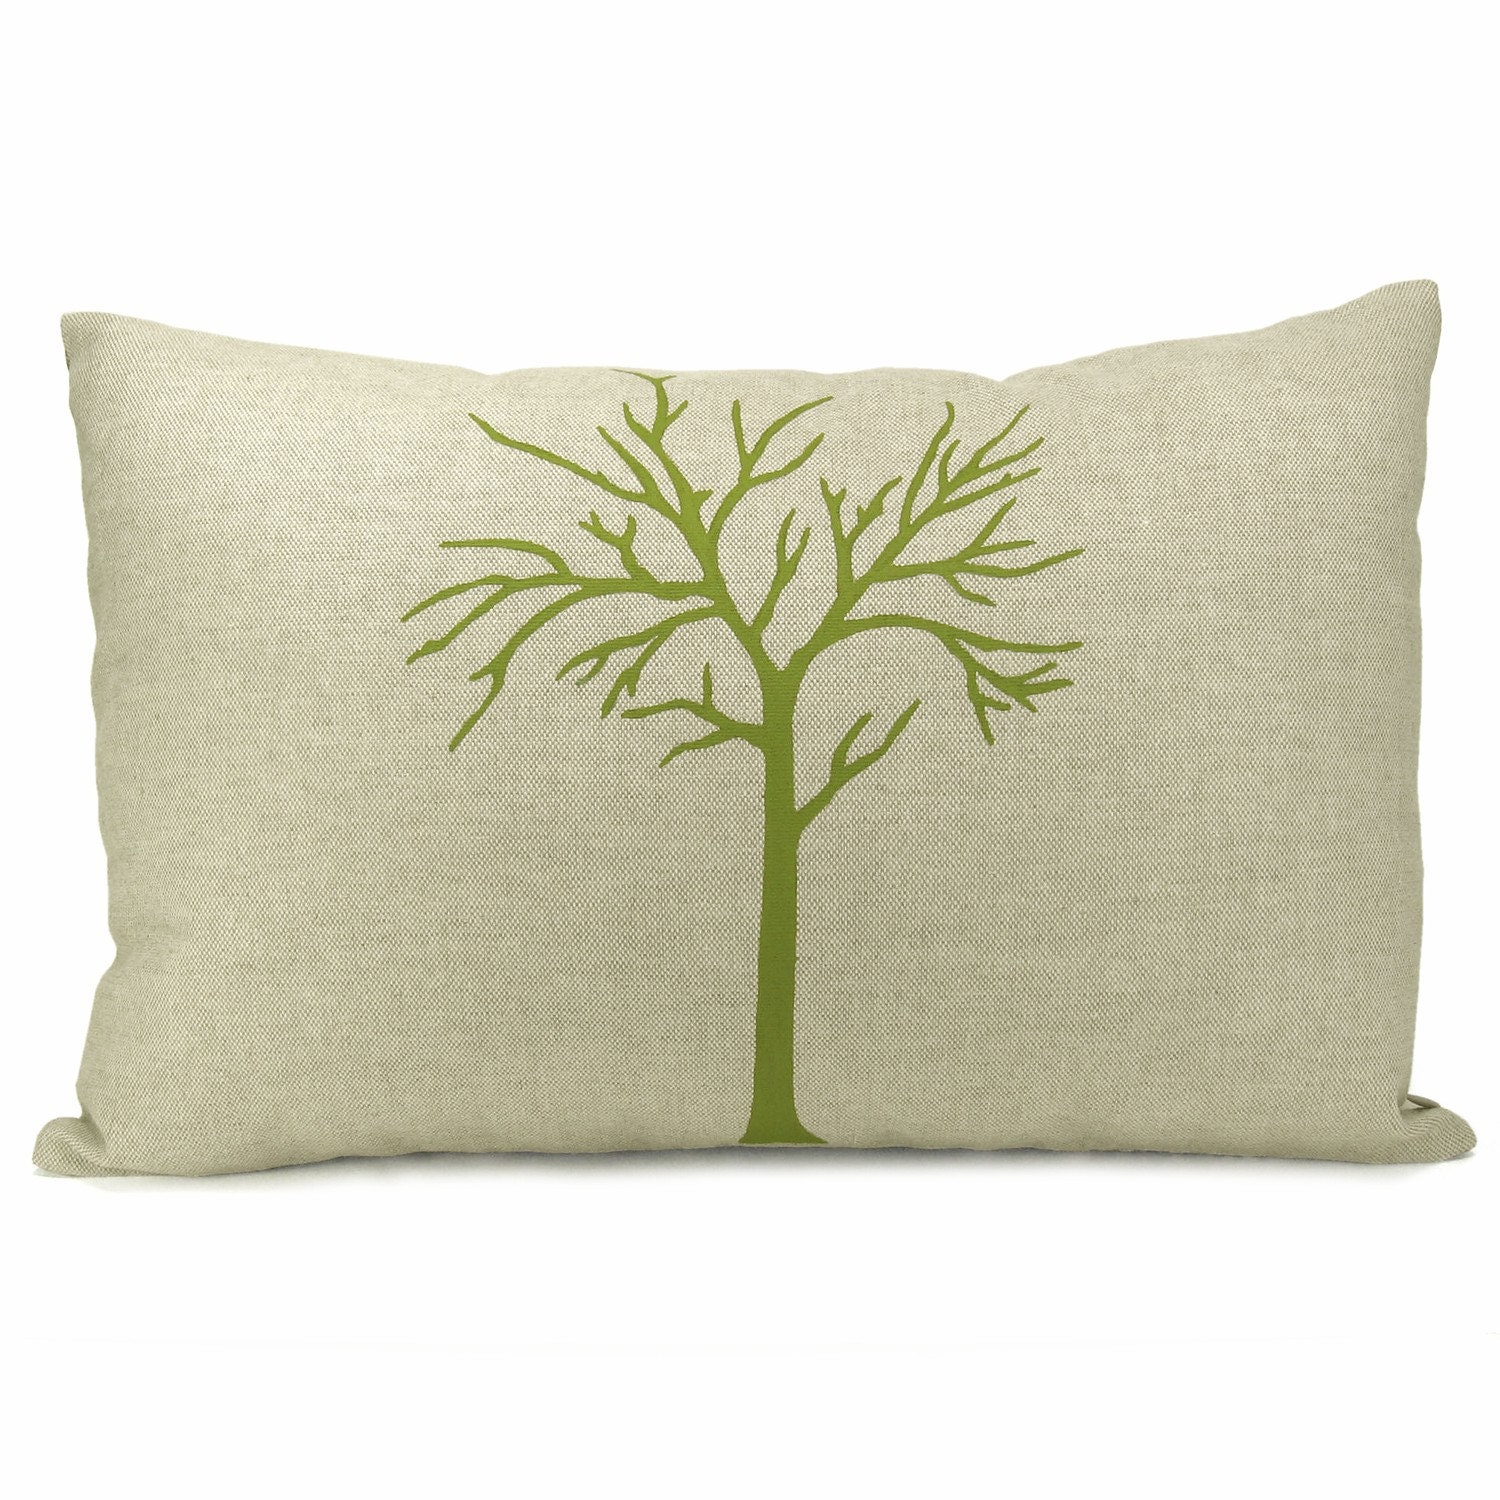 Green Modern Tree on Natural Linen Front And Damask Linen Back Cushion Cover